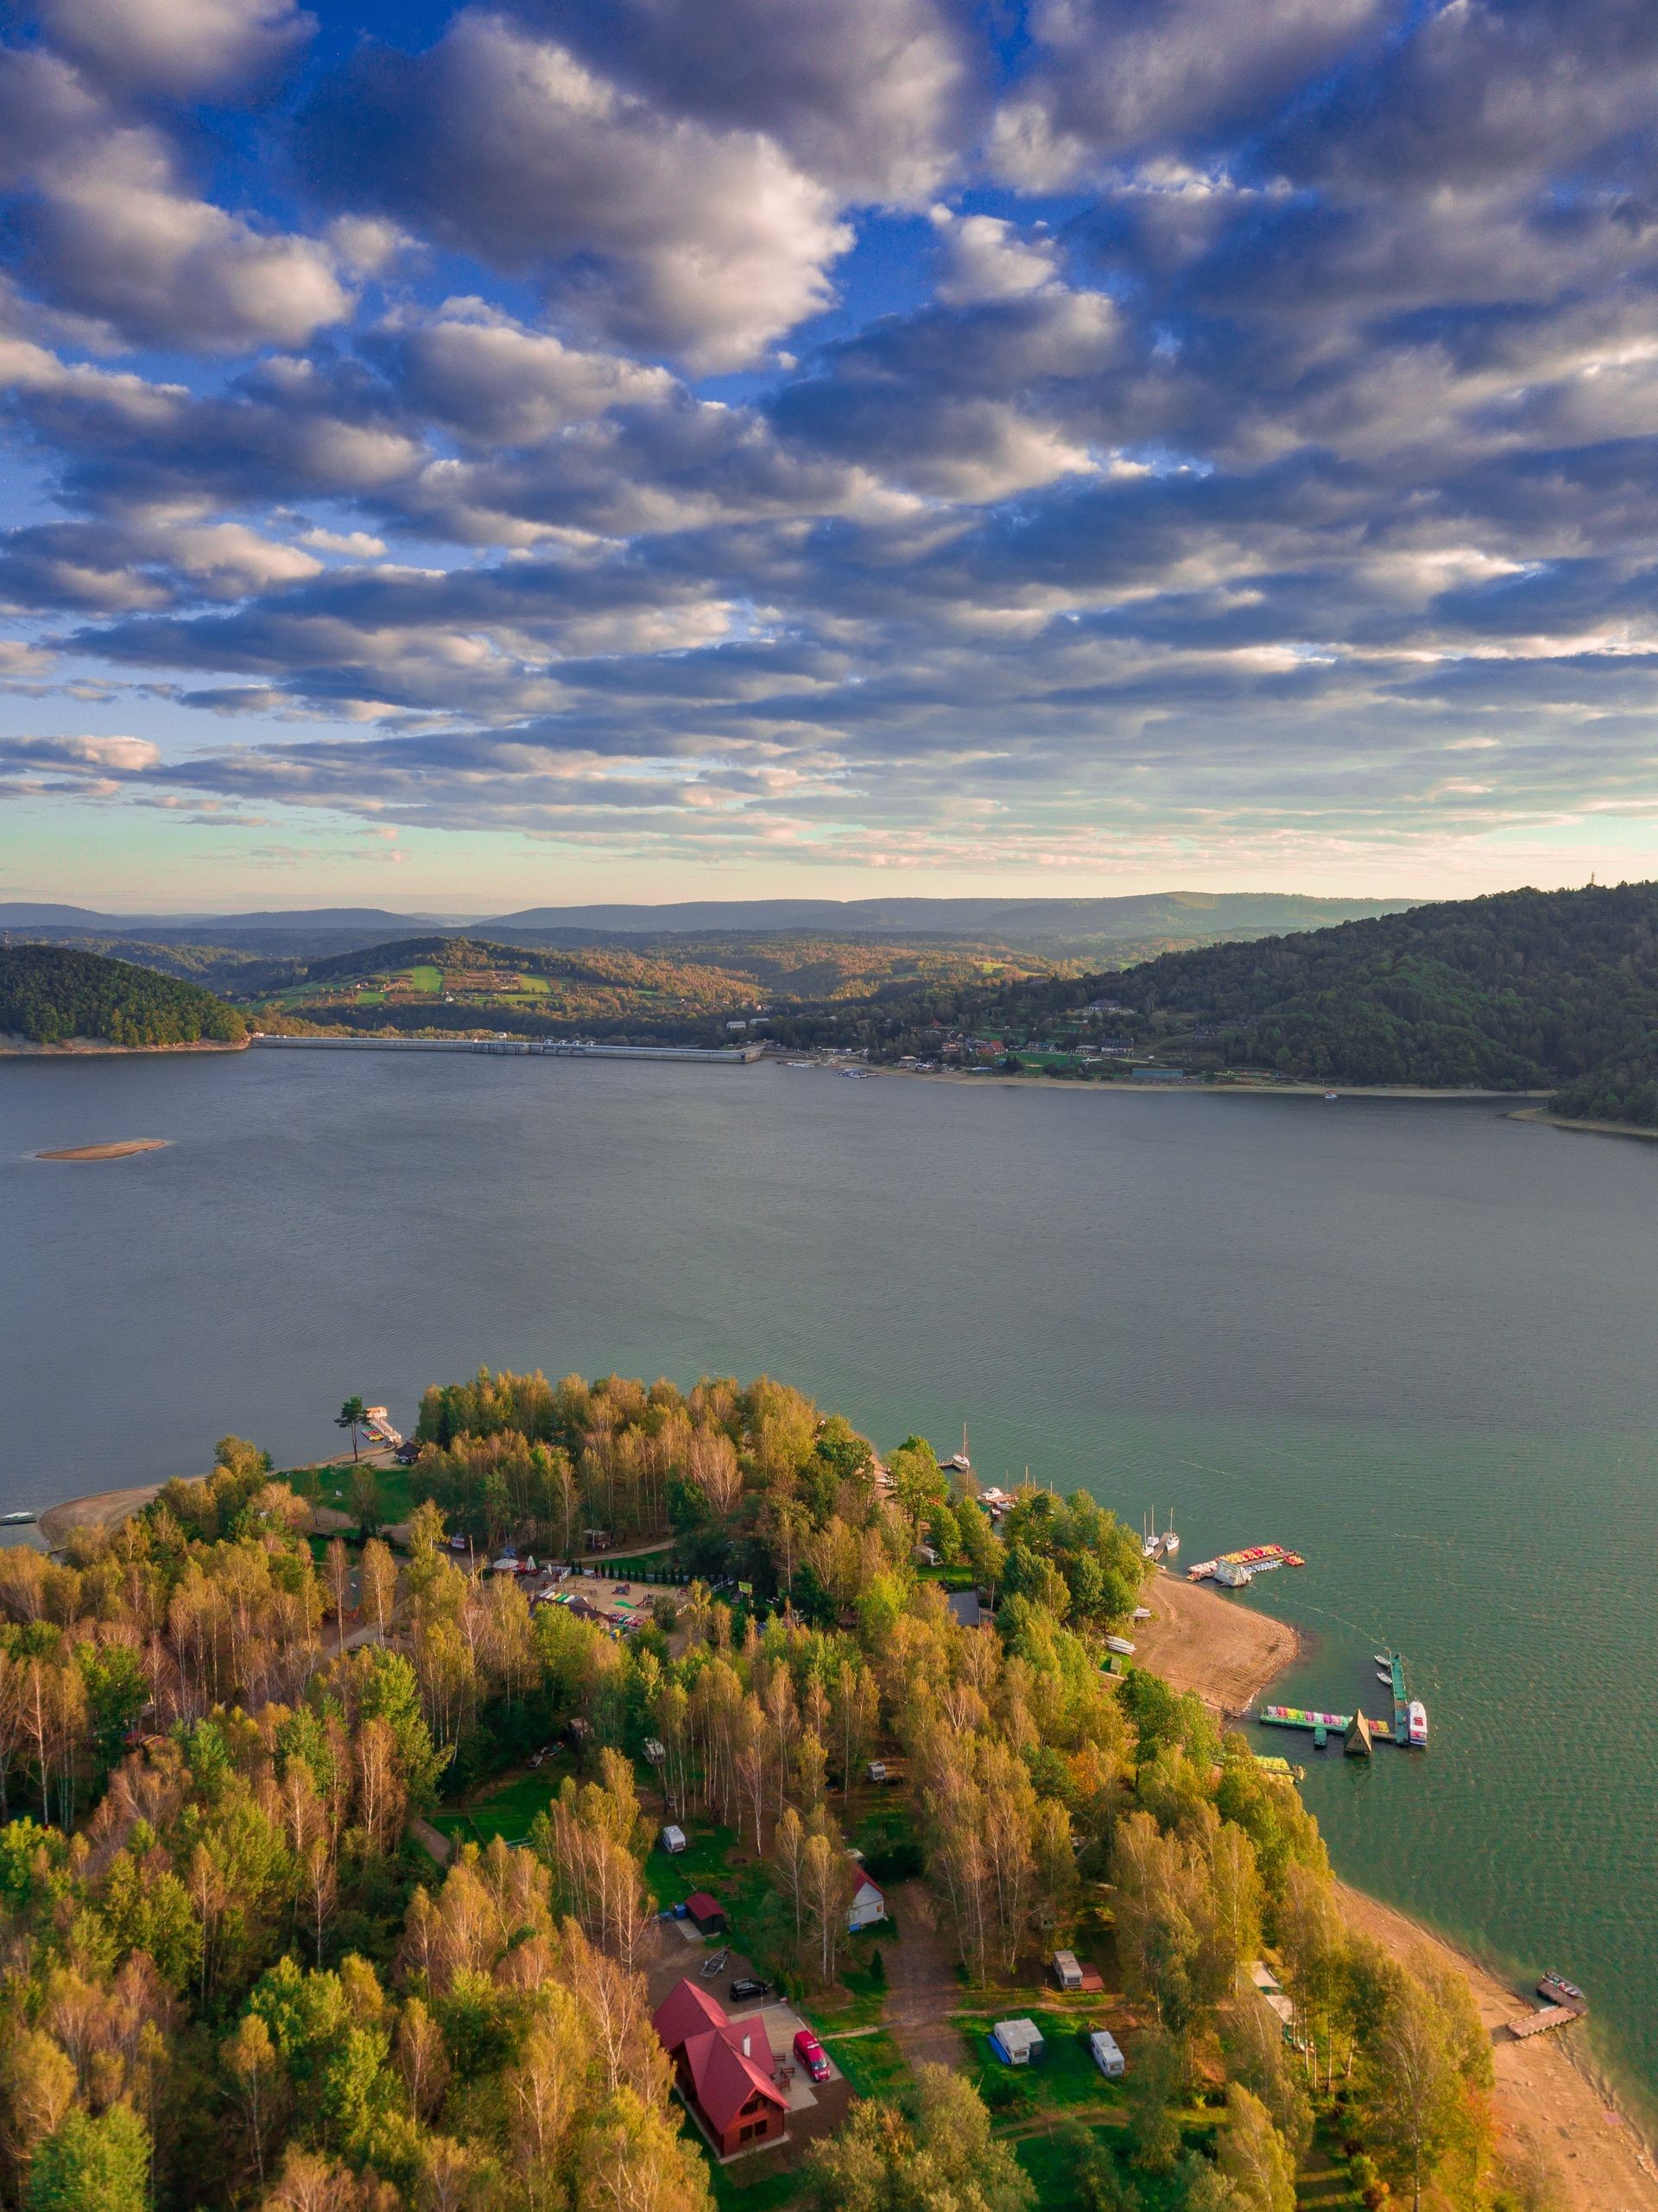 Solinskie lake in Bieszczady mountains in sunrise light. Aerial, drone photography.